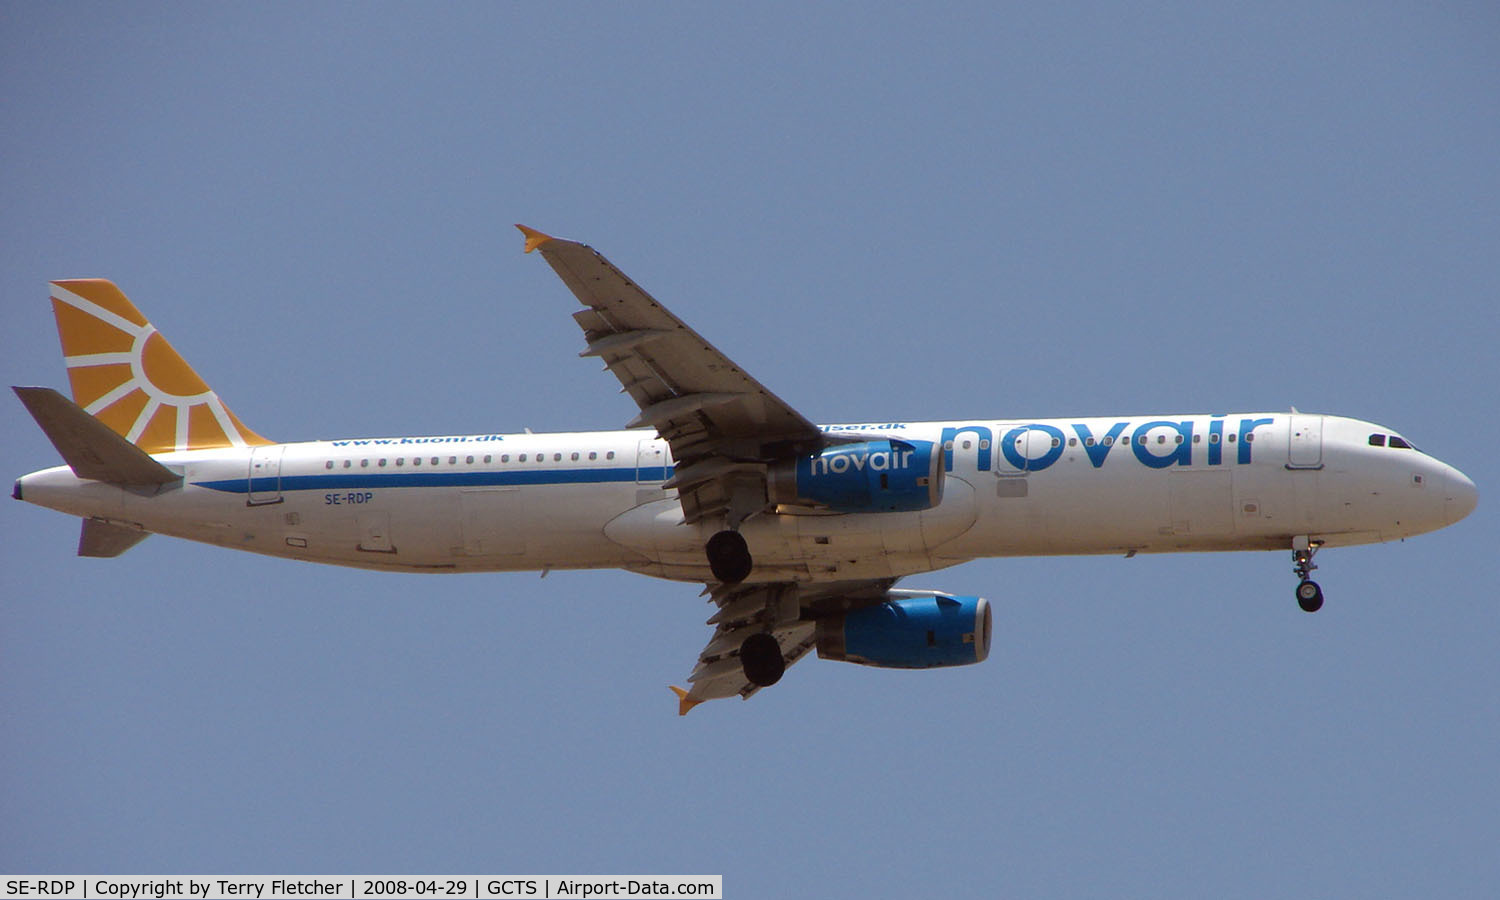 SE-RDP, 2005 Airbus A321-231 C/N 2410, Novair A321 on approach to Runway 08 at Tenerife South